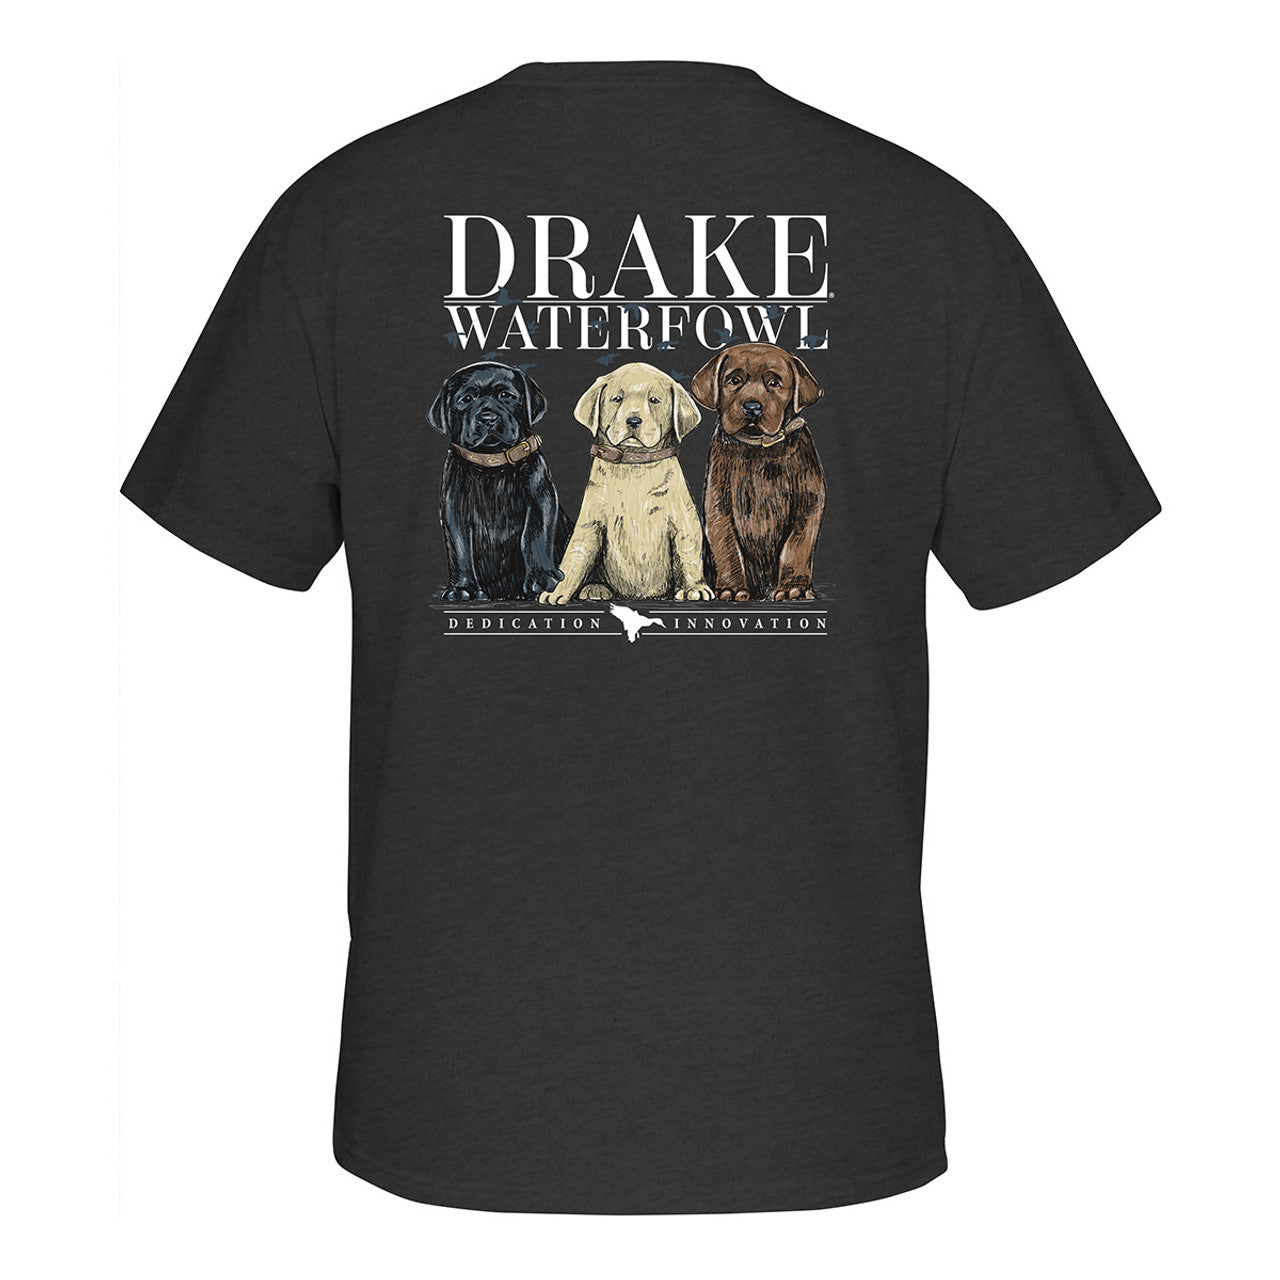 LAB PUPPIES SHORT SLEEVE T-SHIRT - CHARCOAL HEATHER